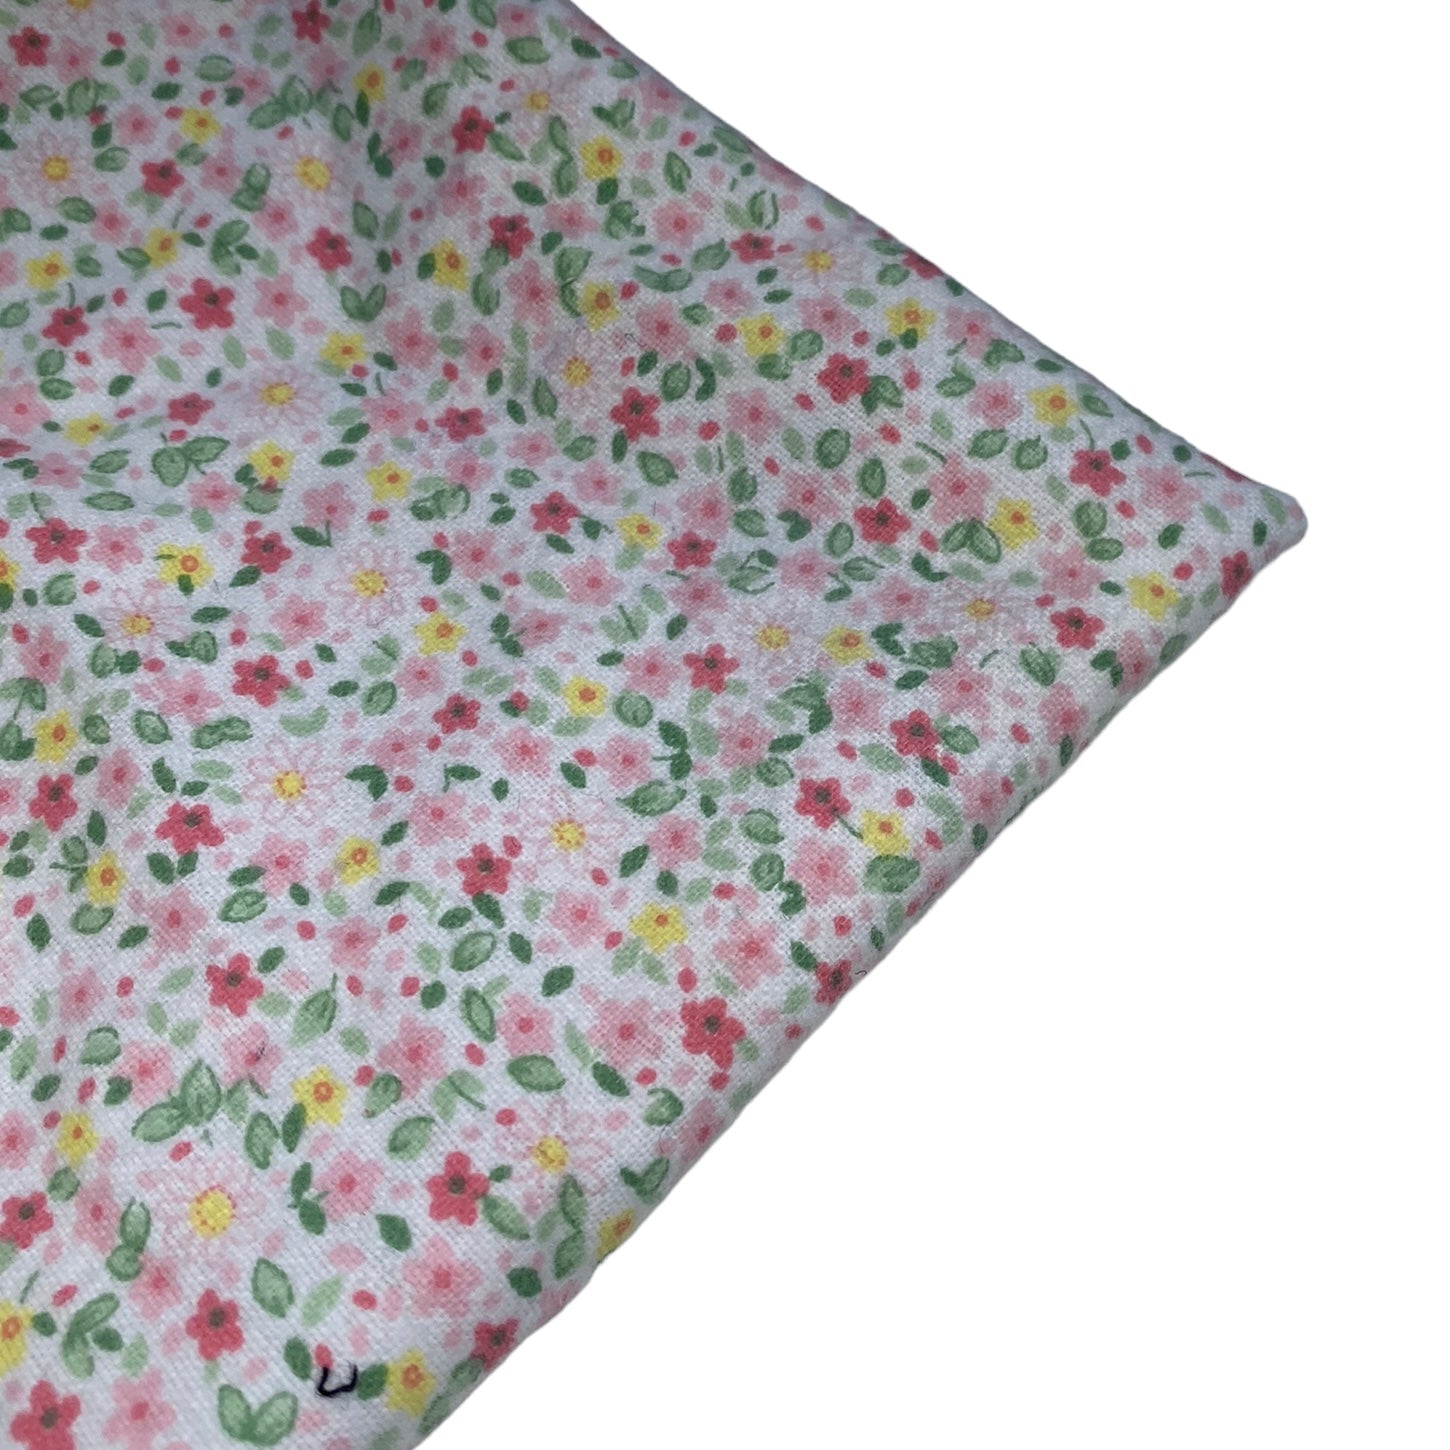 Printed Cotton Flannel - Floral - White/Pink/Yellow/Green